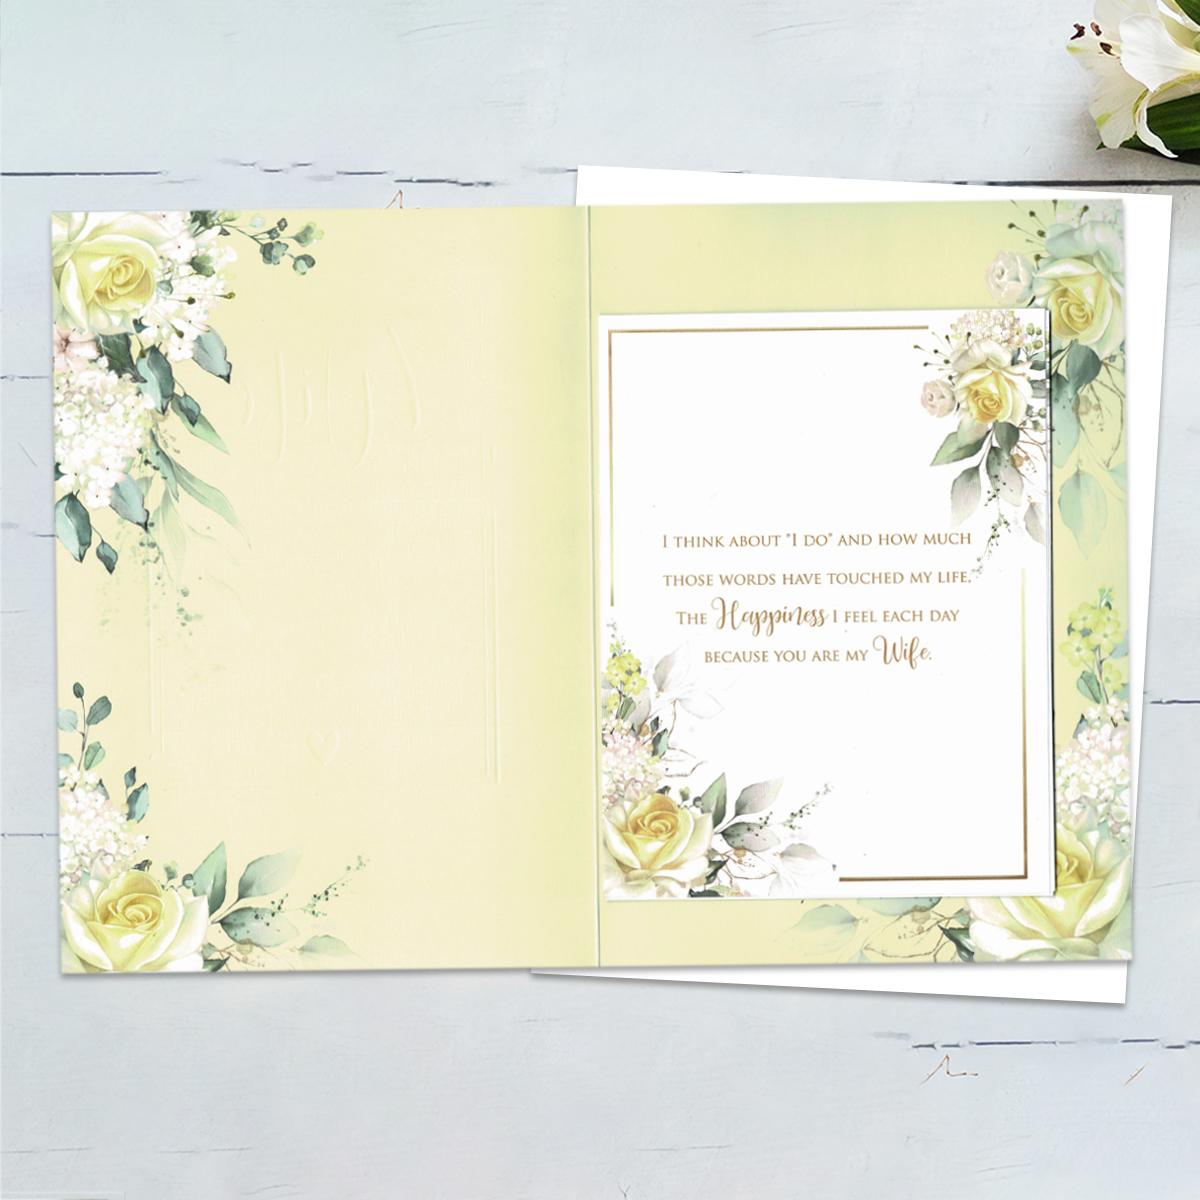 Inside Page 1 In Lemon Colour With Heartfelt Words And Colour Images